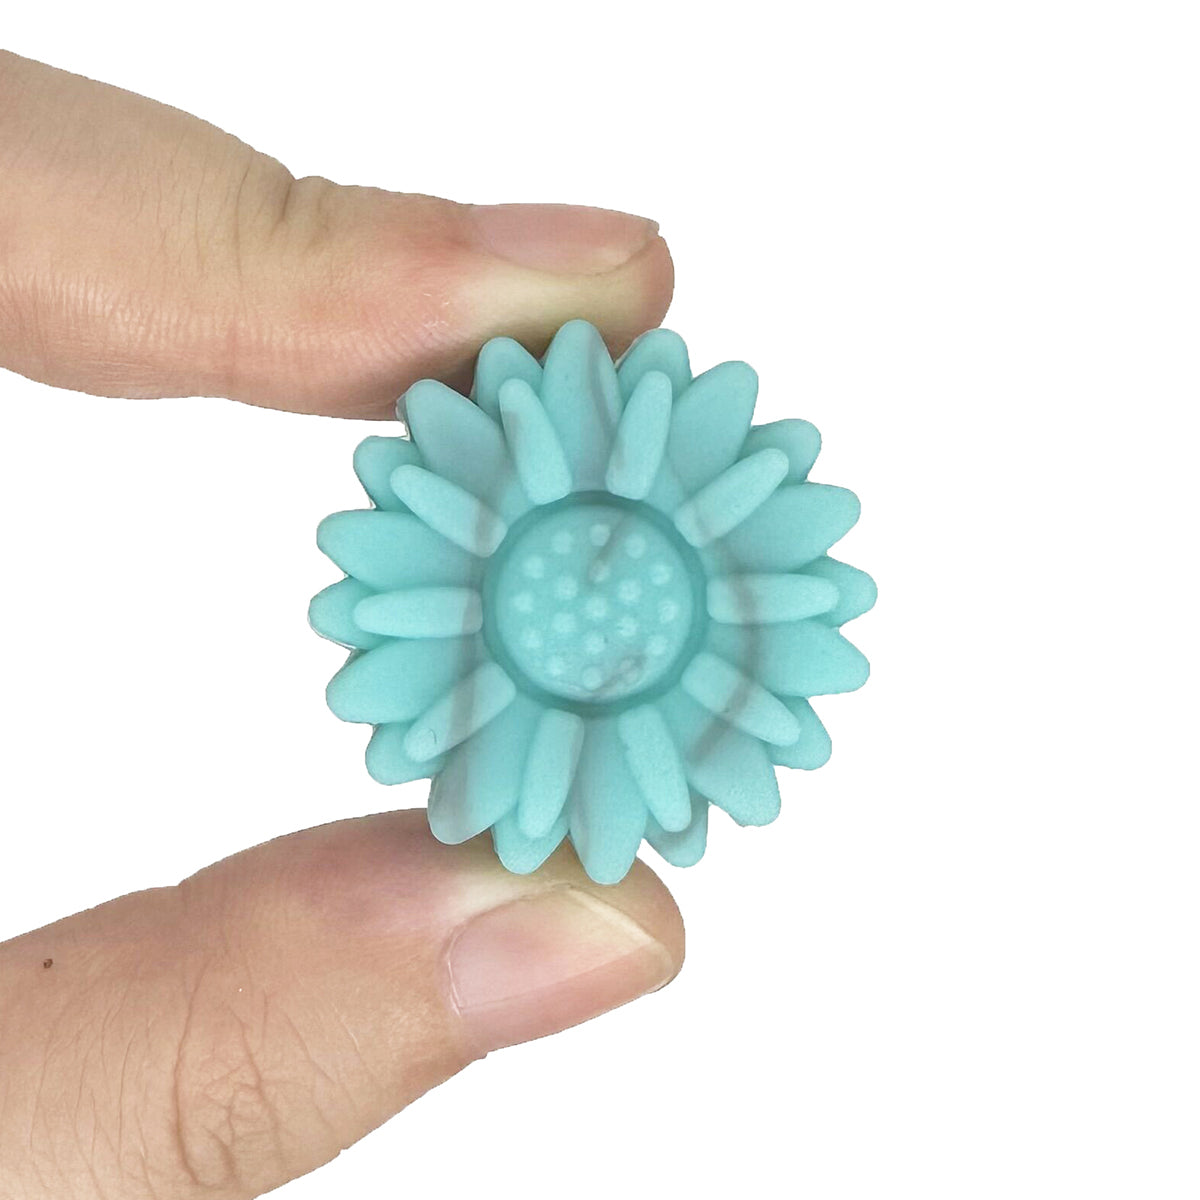 30mm Turquoise Marble Sunflower Silicone Focal Beads